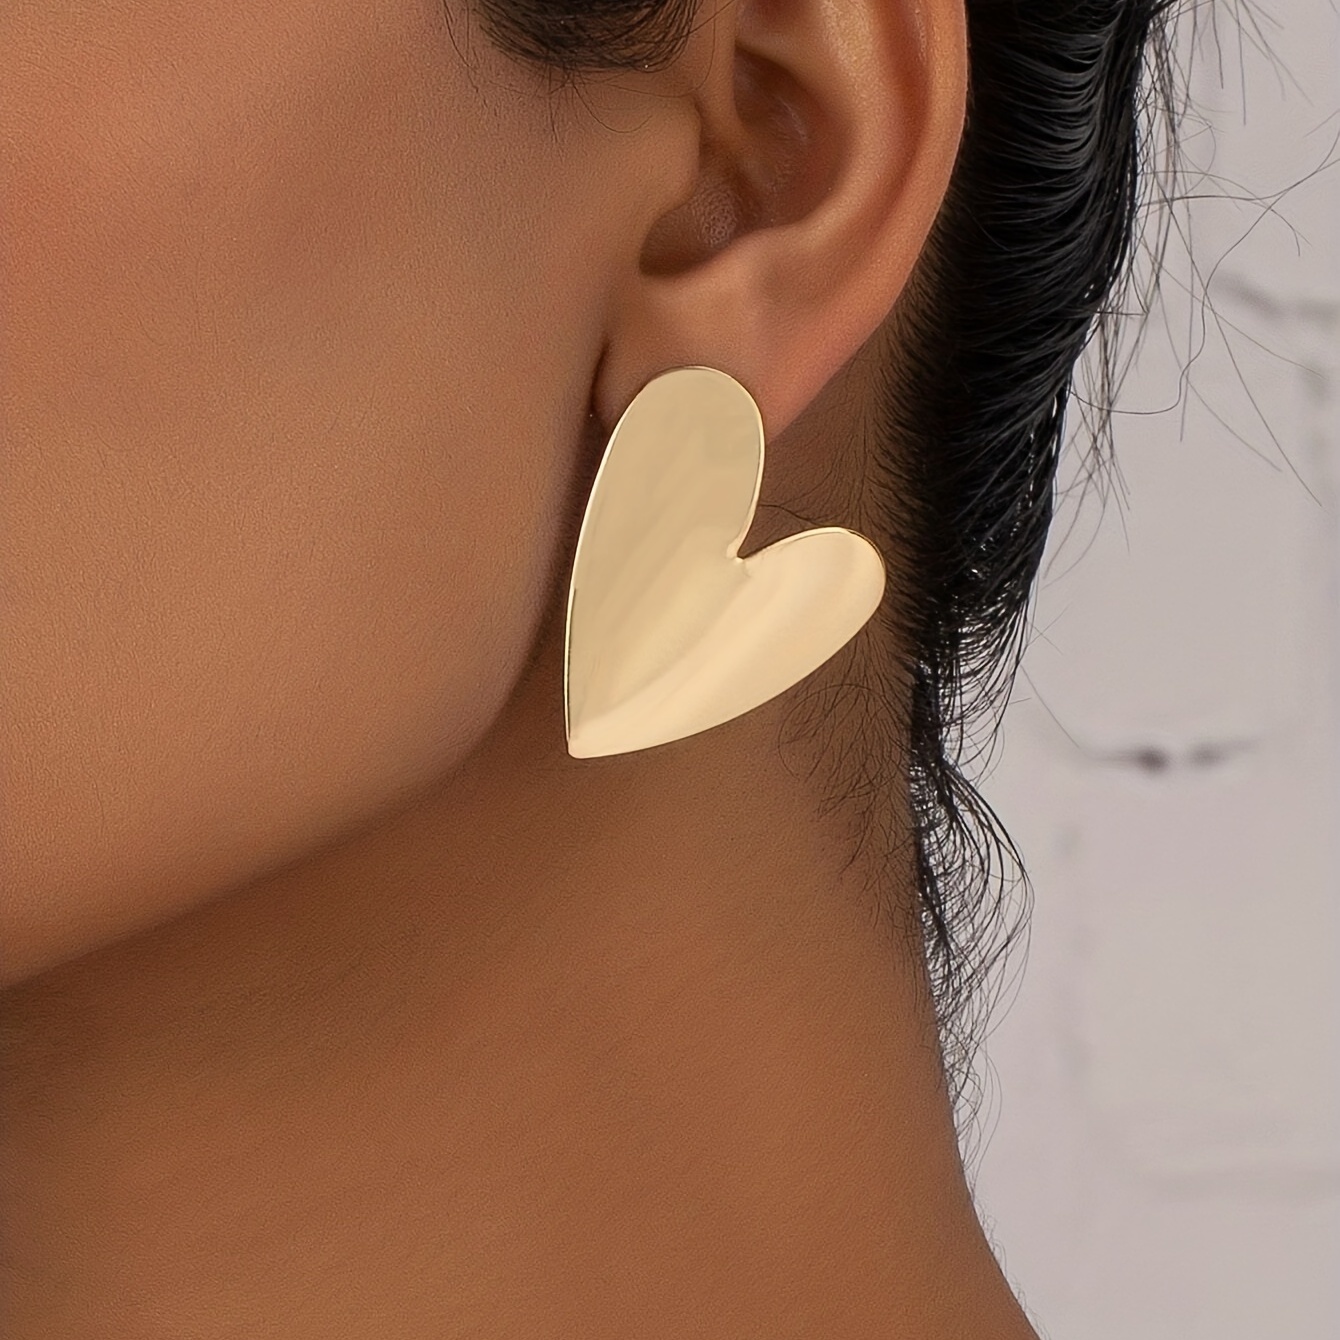 

Golden Glossy Heart Design Stud Earrings Sexy Leisure Style Alloy 18k Gold Plated Jewelry Gift For Lovers